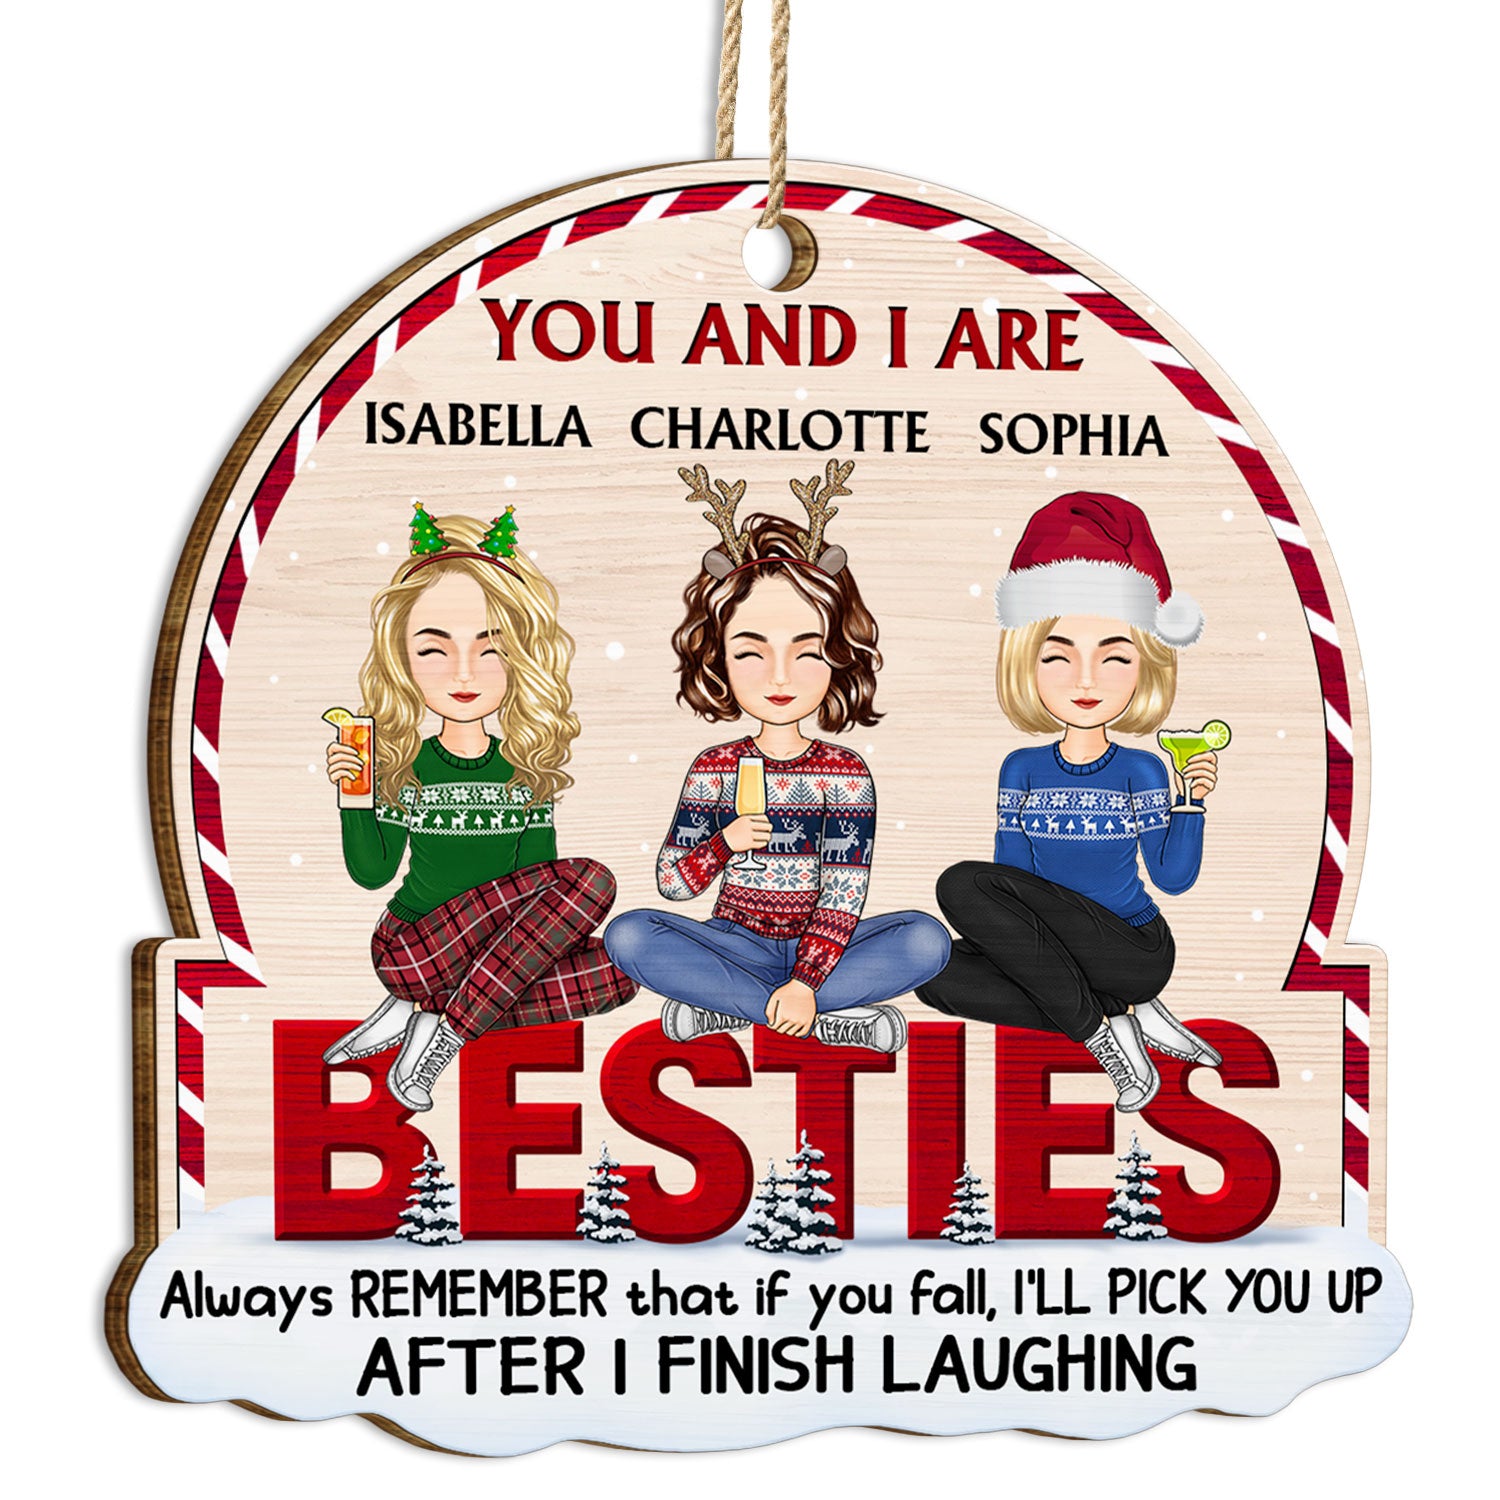 After I Finish Laughing - Christmas Gift For Bestie, Sister - Personalized Custom Shaped Wooden Ornament